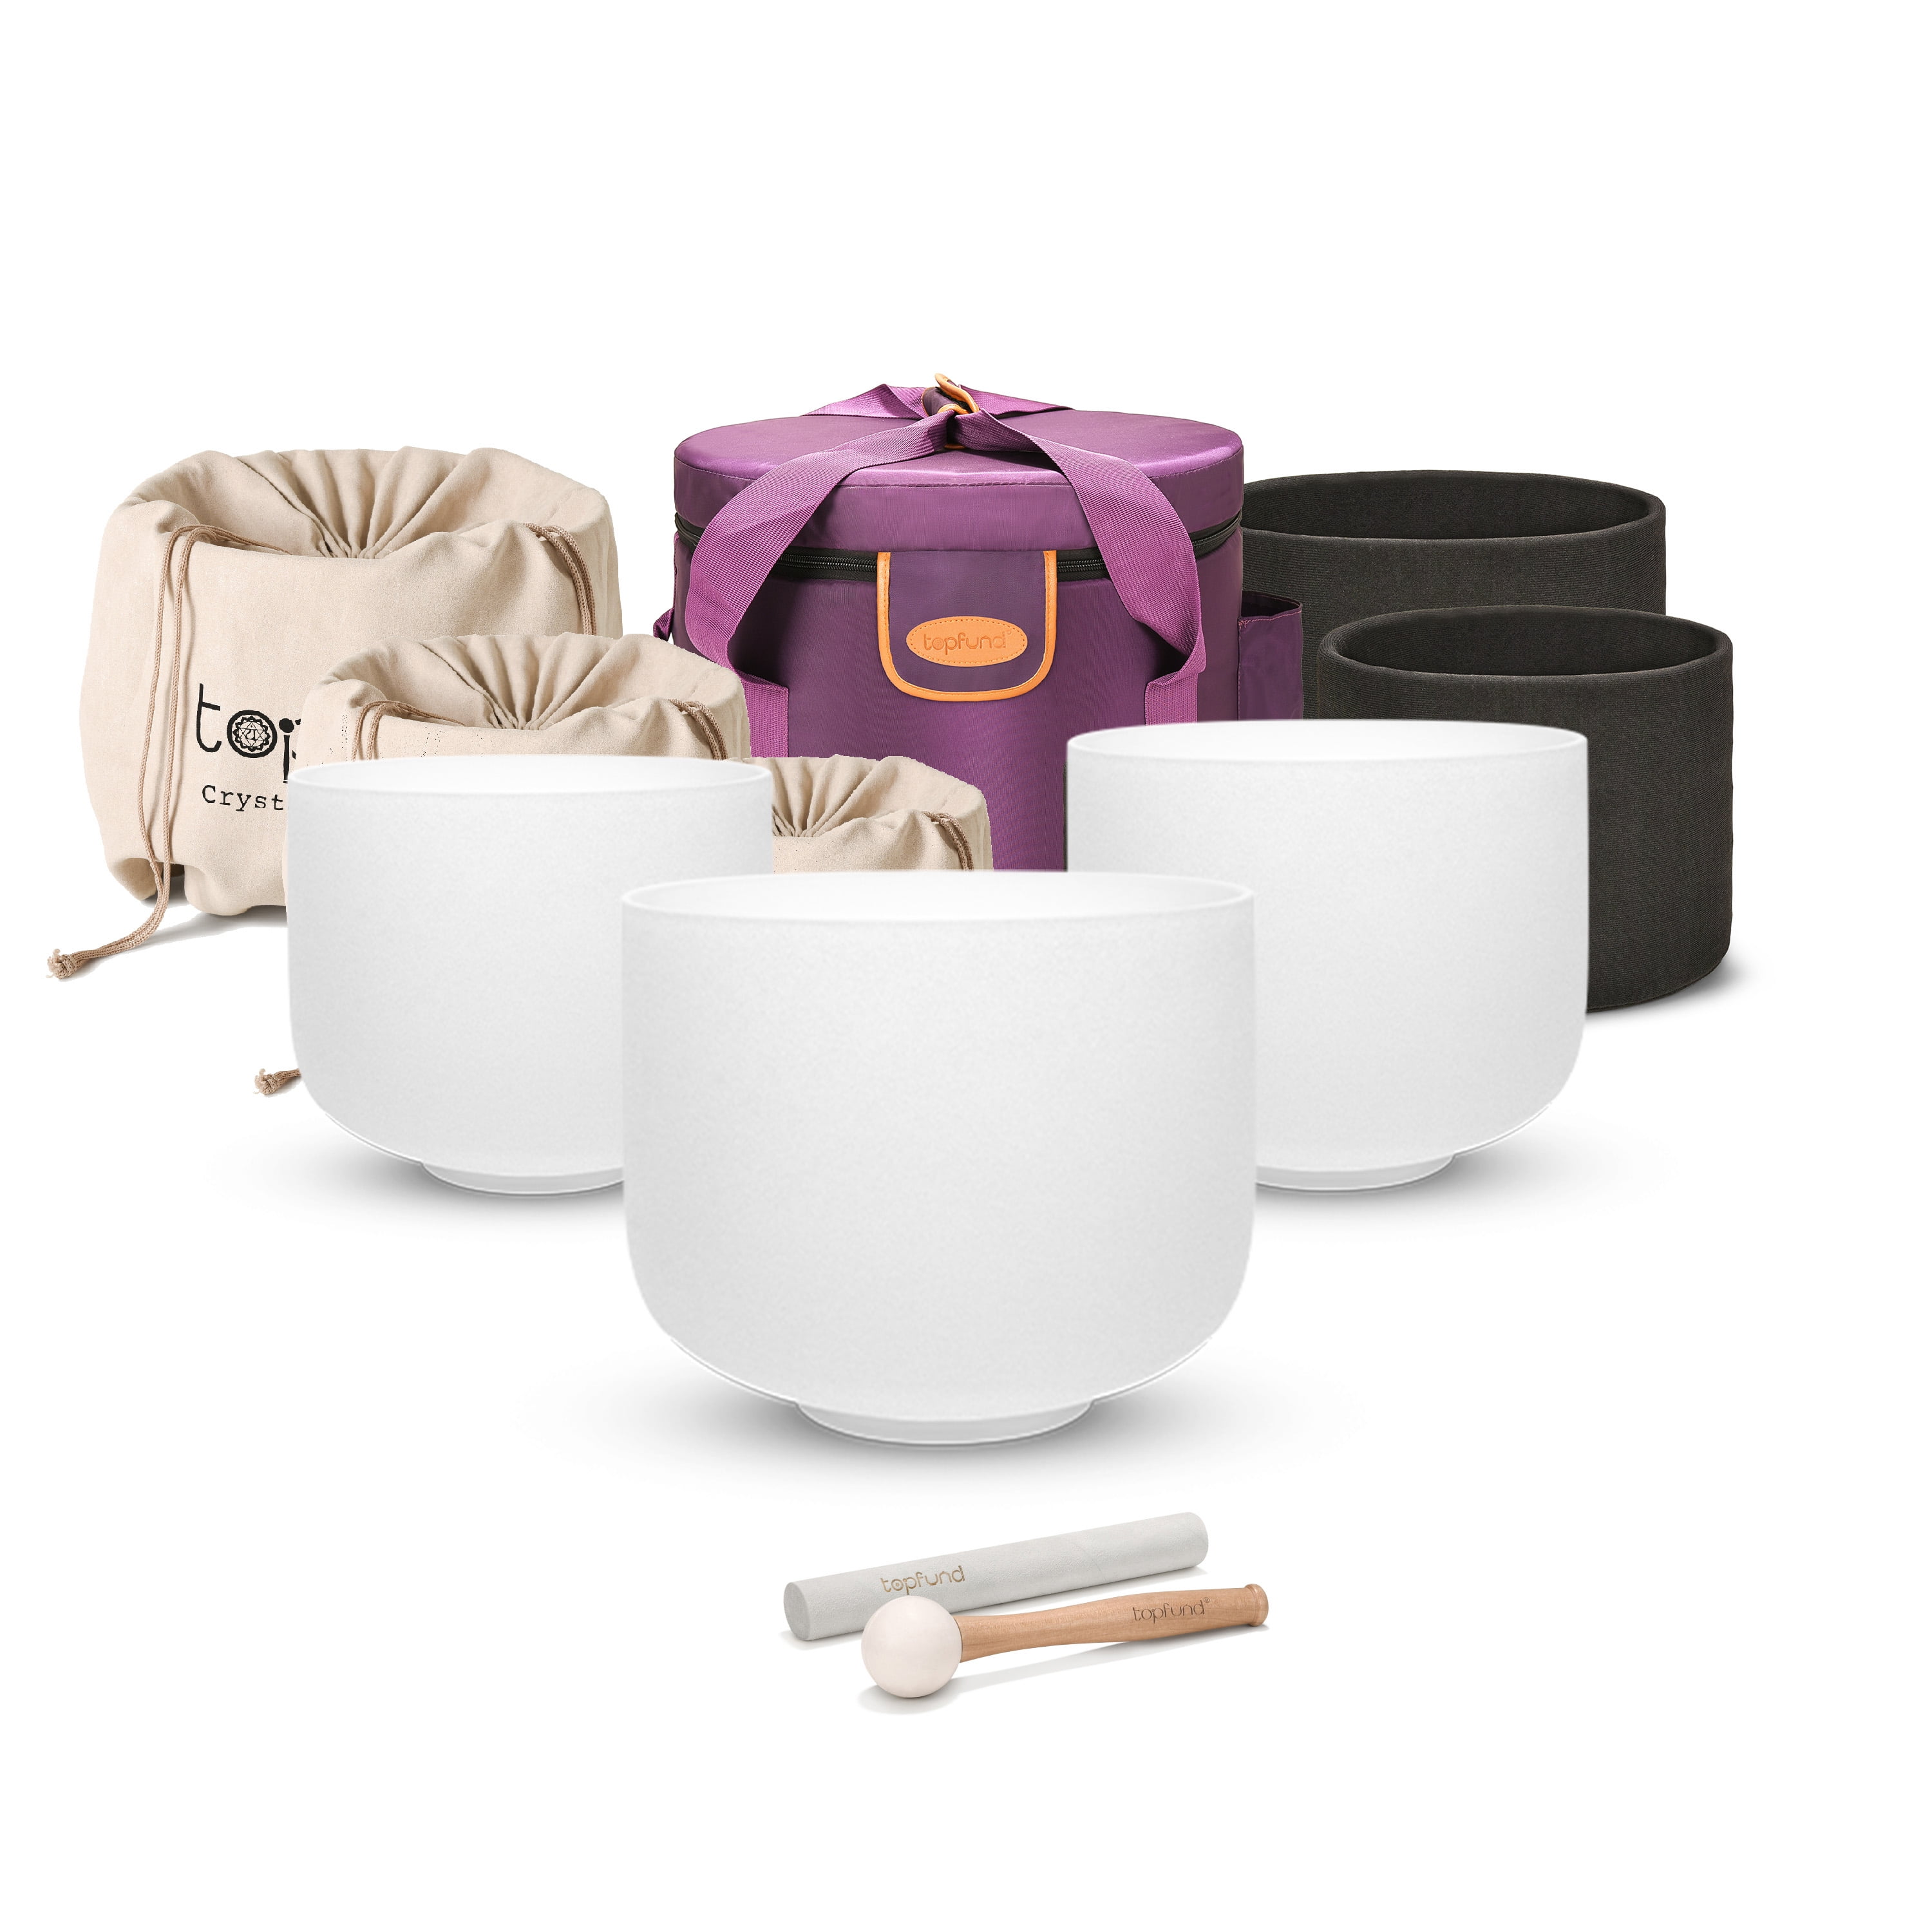 TOPFUND 432hz D Note Sacral Chakra Frosted Quartz crstal singing bowl 8 inch heavy duty bag and suede striker and o ring included